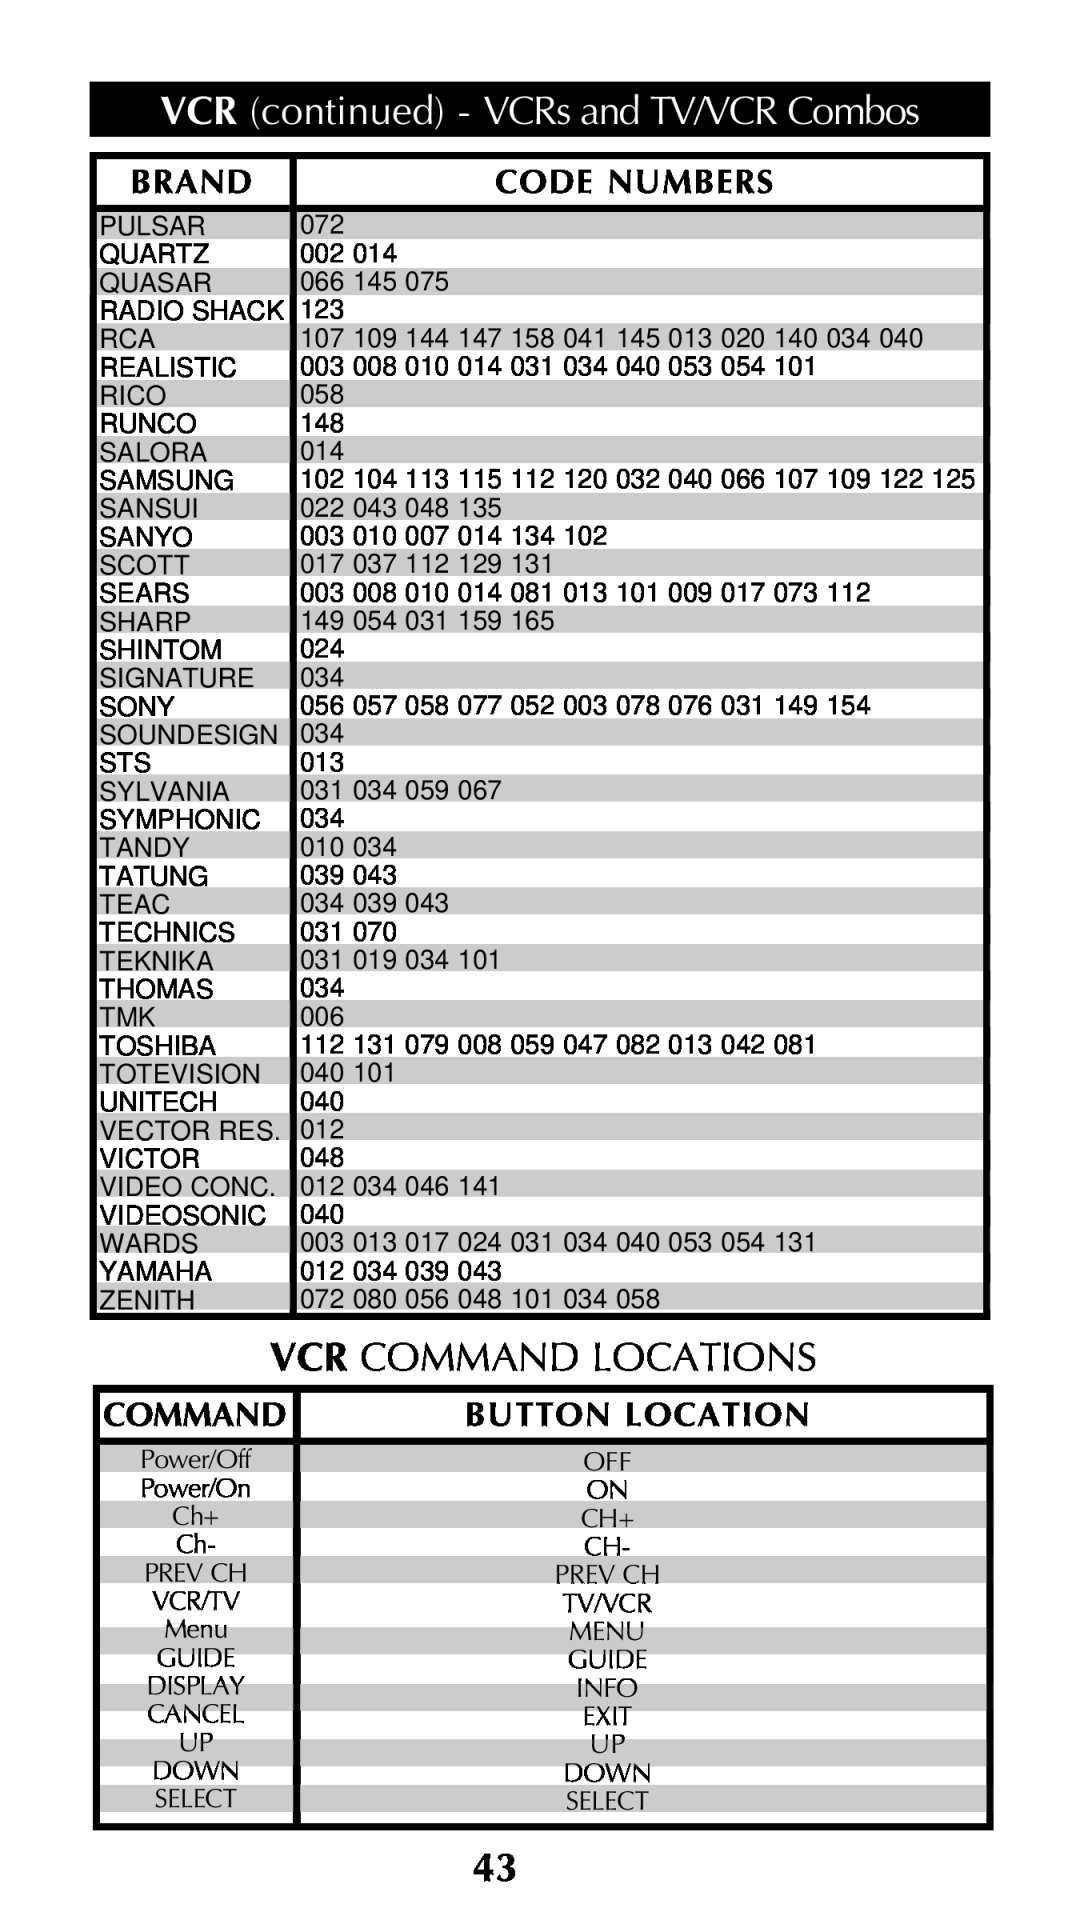 Universal Remote Control Unifier URC-100 owner manual VCR continued - VCRs and TV/VCR Combos, Vcr Command Locations 